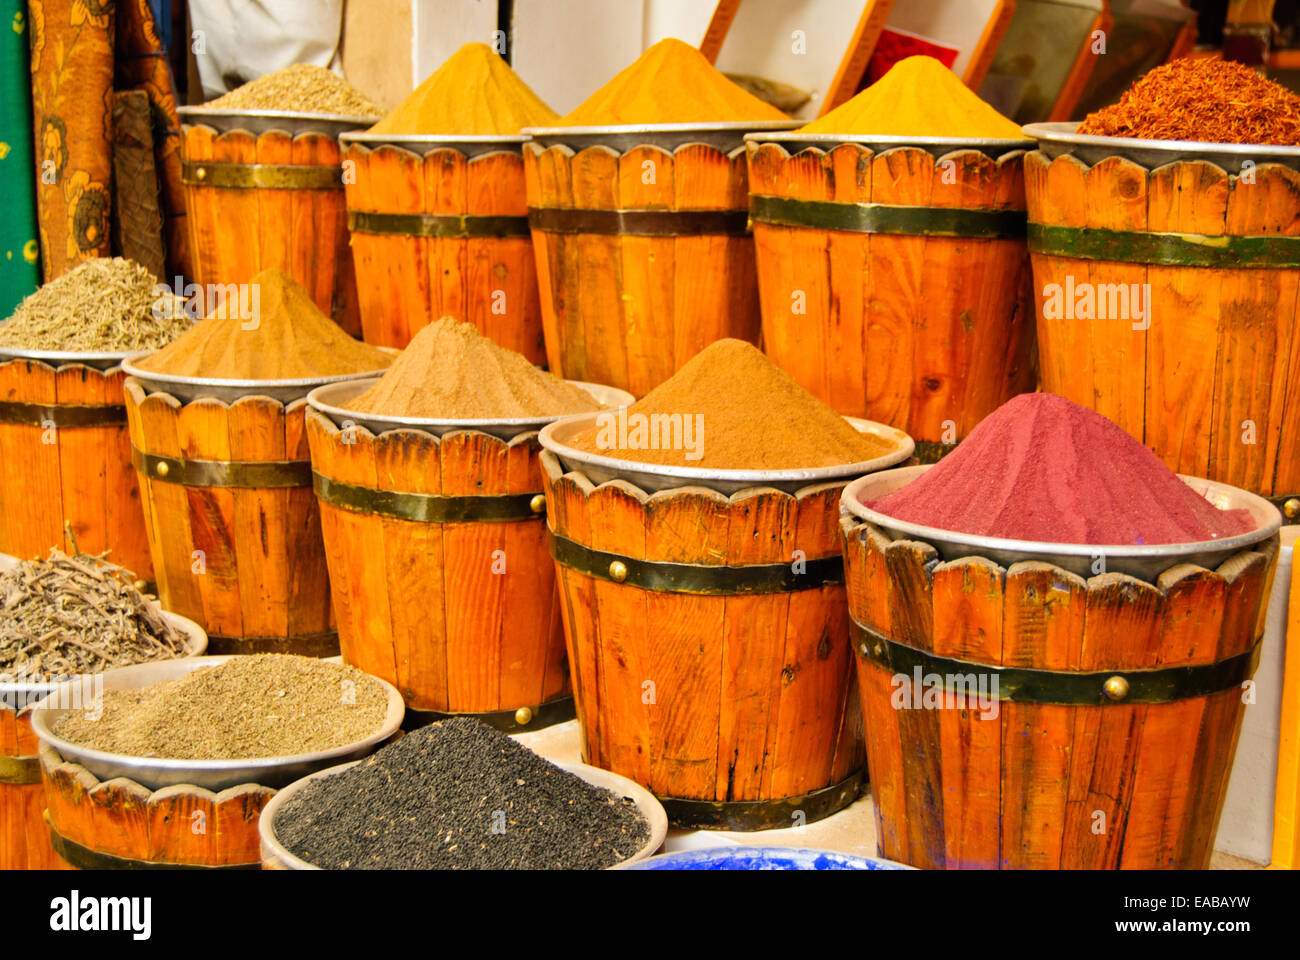 Buckets of spices in a market in Aswan Stock Photo